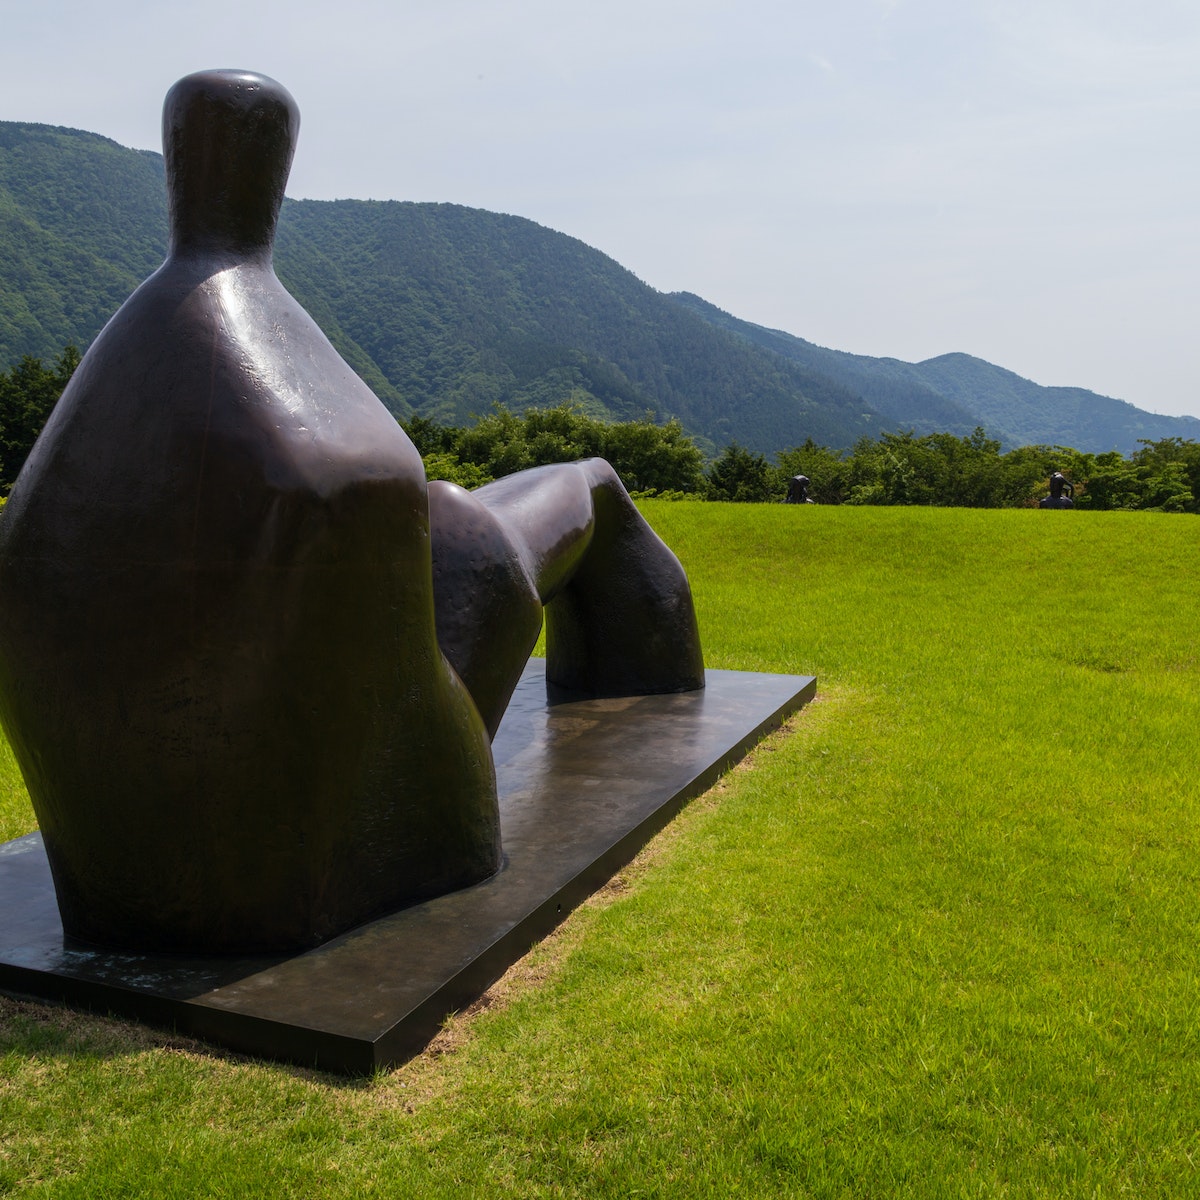 HAKONE, KANAGAWA, JAPAN - 2014/06/20: The Hakone Open Air Museum creates a harmonic balance of the nature of Hakone National Park with art in the form of scultpures and other artwork, usually replicas, using the nature of Hakone National Park as a frame or background. The park encourages children to play and be entertained as well as to inspire visitors. (Photo by John S Lander/LightRocket via Getty Images)